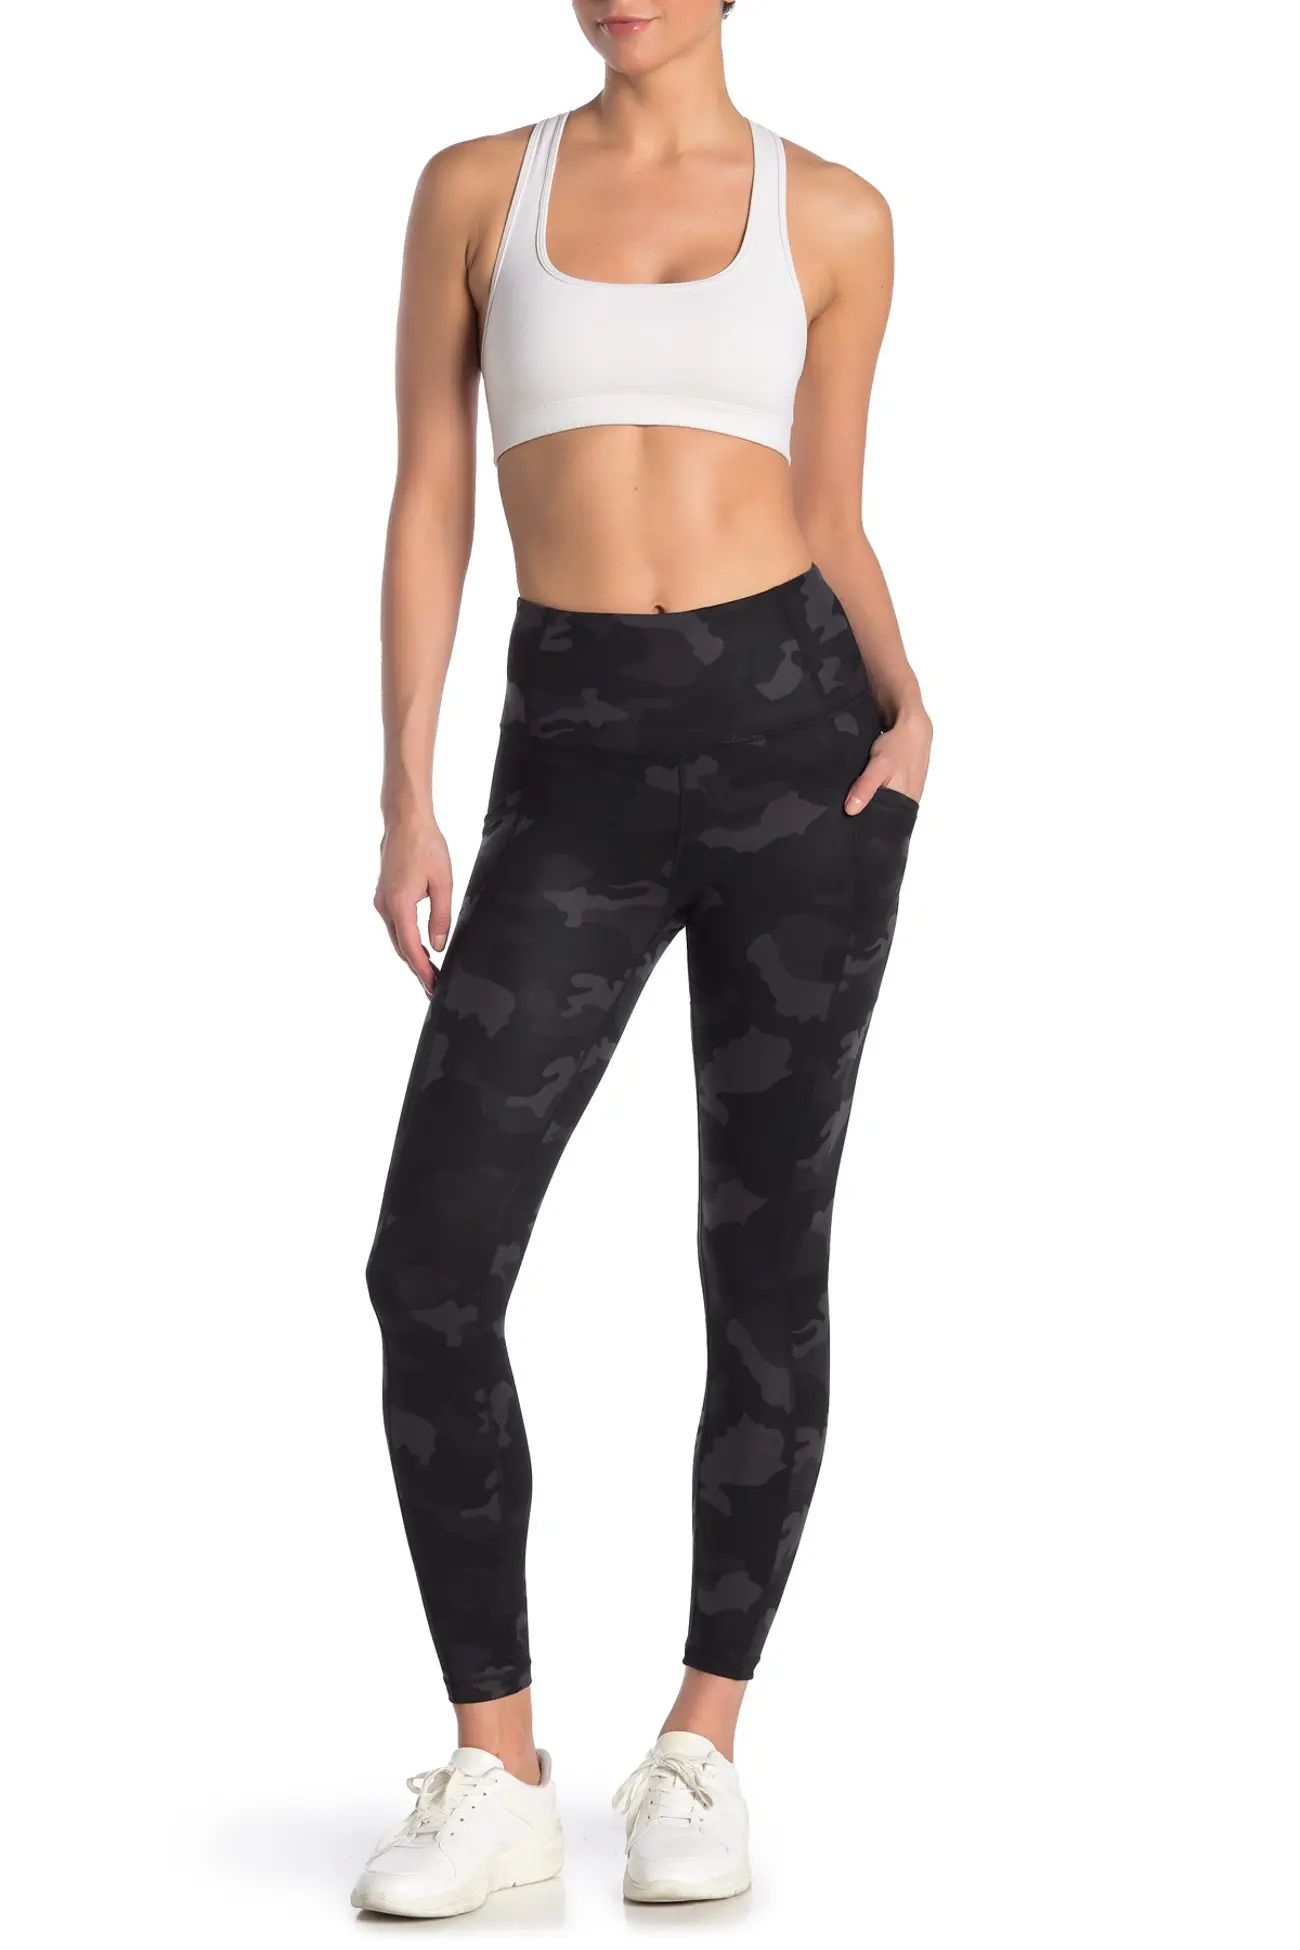 90 Degree By Reflex | Yogalicious Lux Camo High Waisted Side Pocket Leggings | Nordstrom Rack | Nordstrom Rack